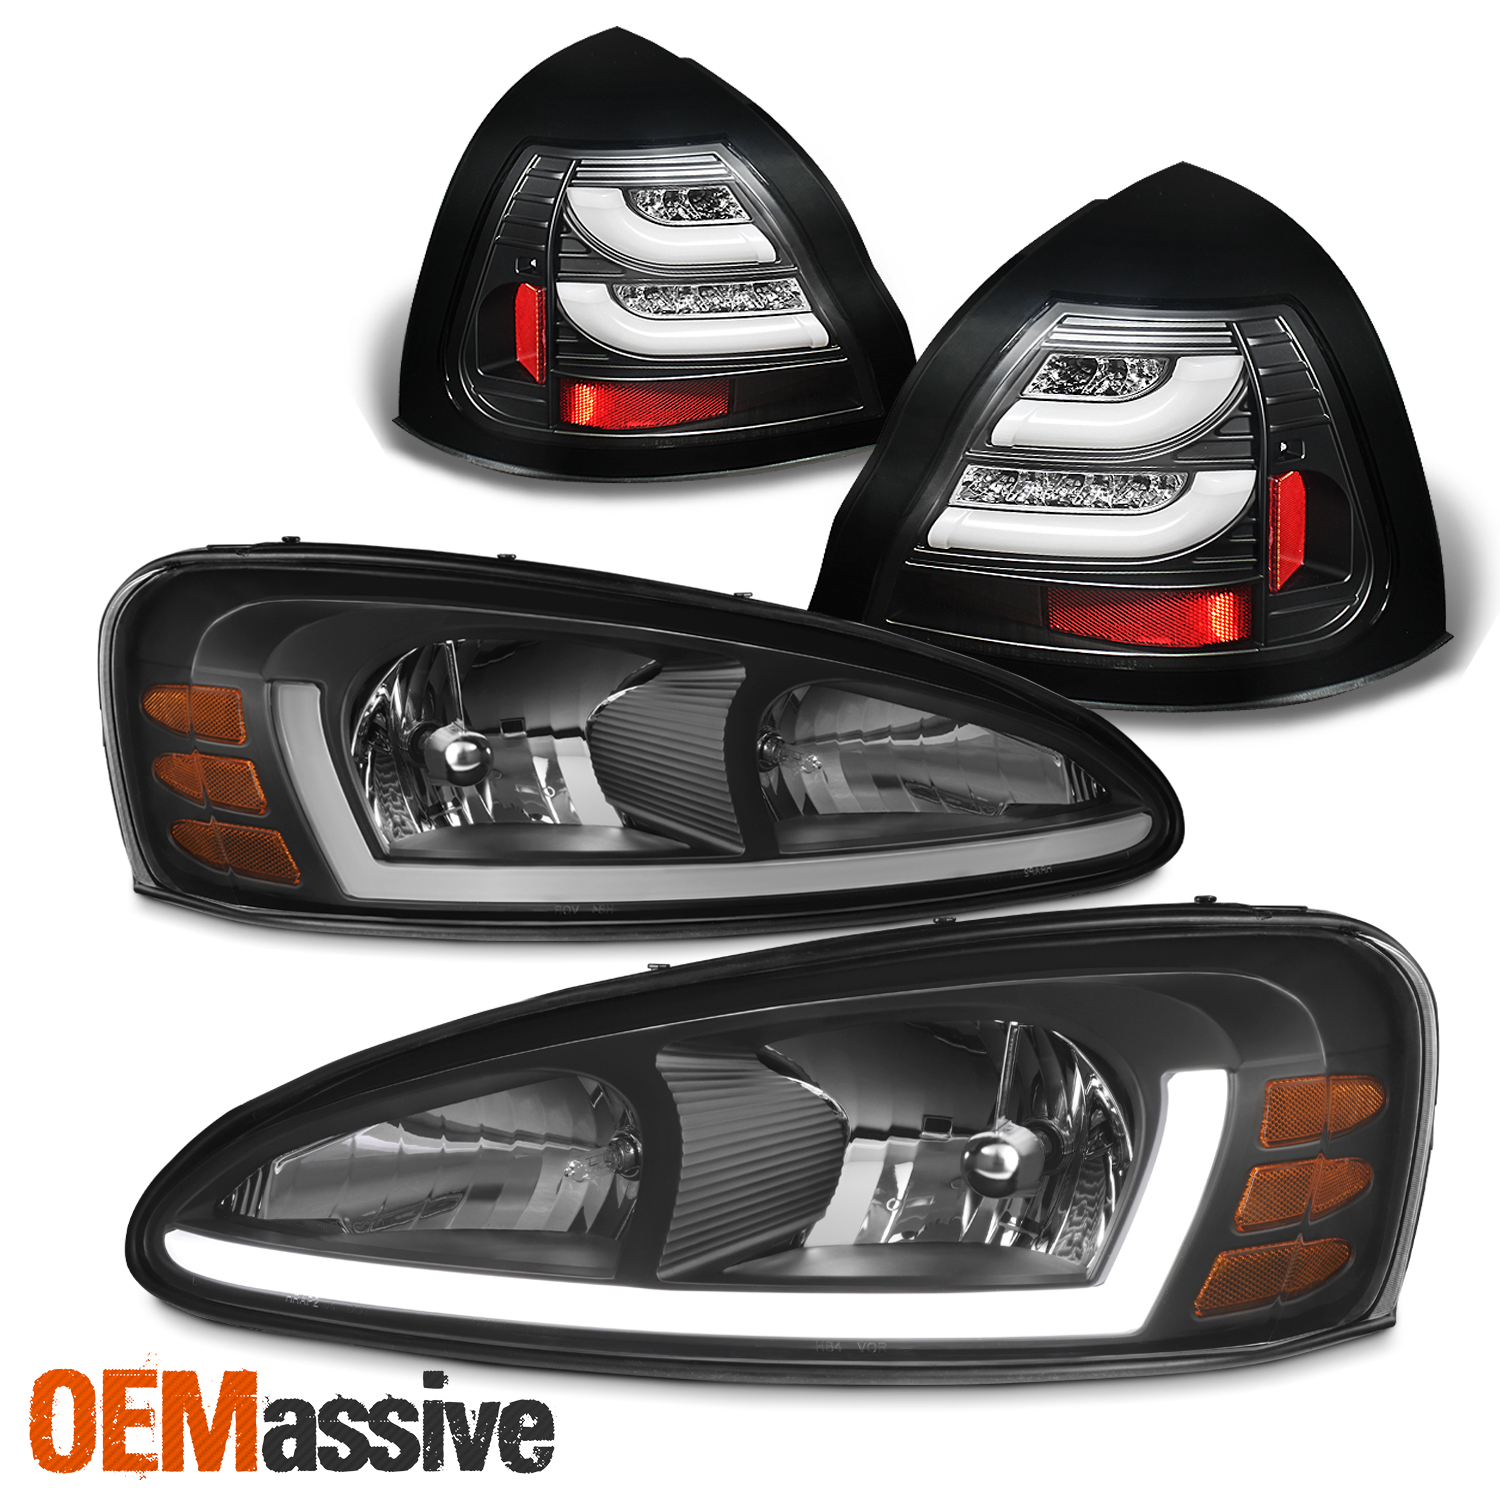 Dark Red Tail Lights Replacement Pair Set Fits 04-06 Pacifica Black Headlights